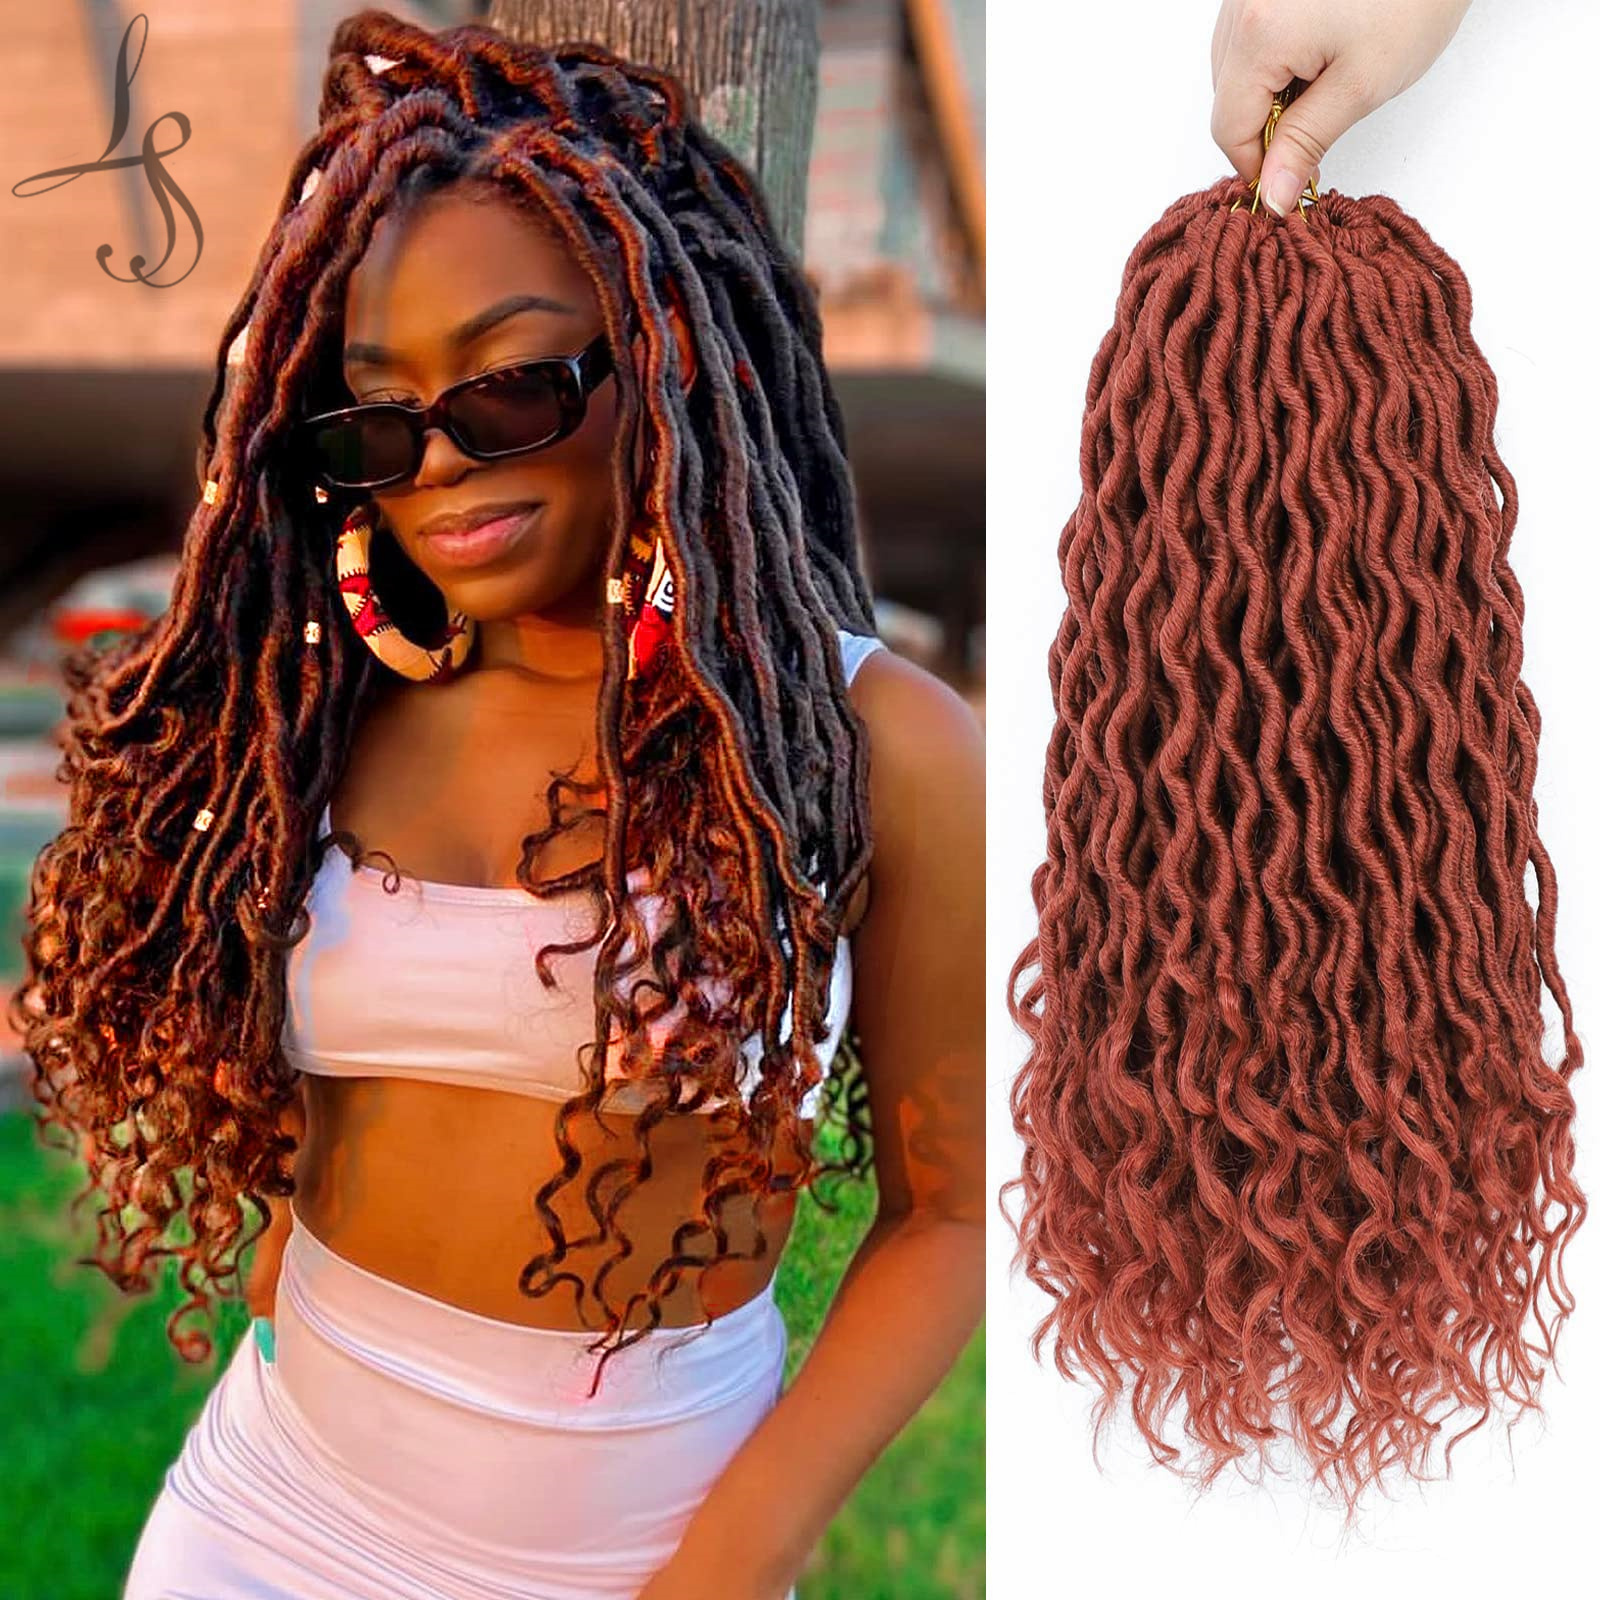 18 Inch Goddess Locs Crochet Hair Wavy Faux for Black Women Ombre with Curly Ends Synthetic Braids Hair Extensions LS12